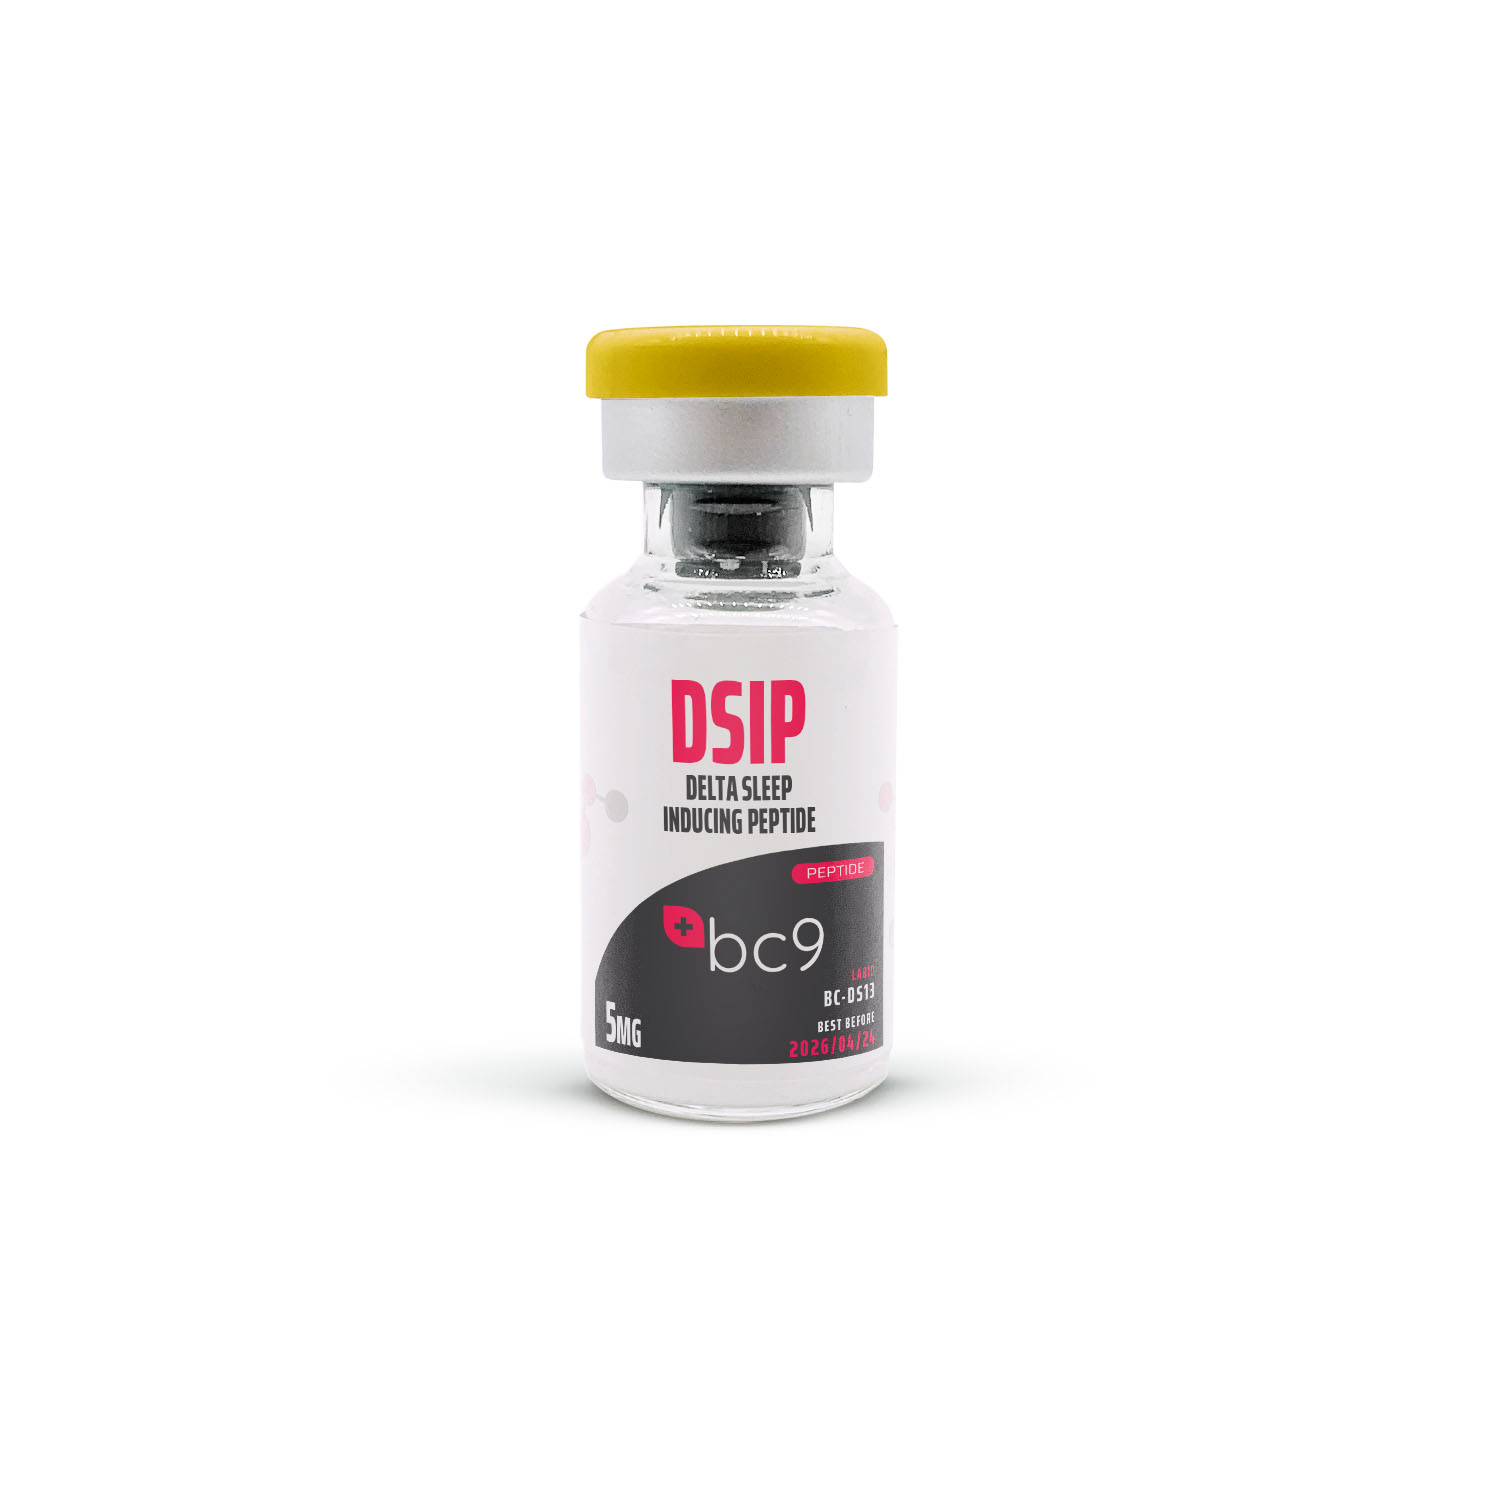 DSIP Peptide for Sale | Fast Shipping | BC9.org